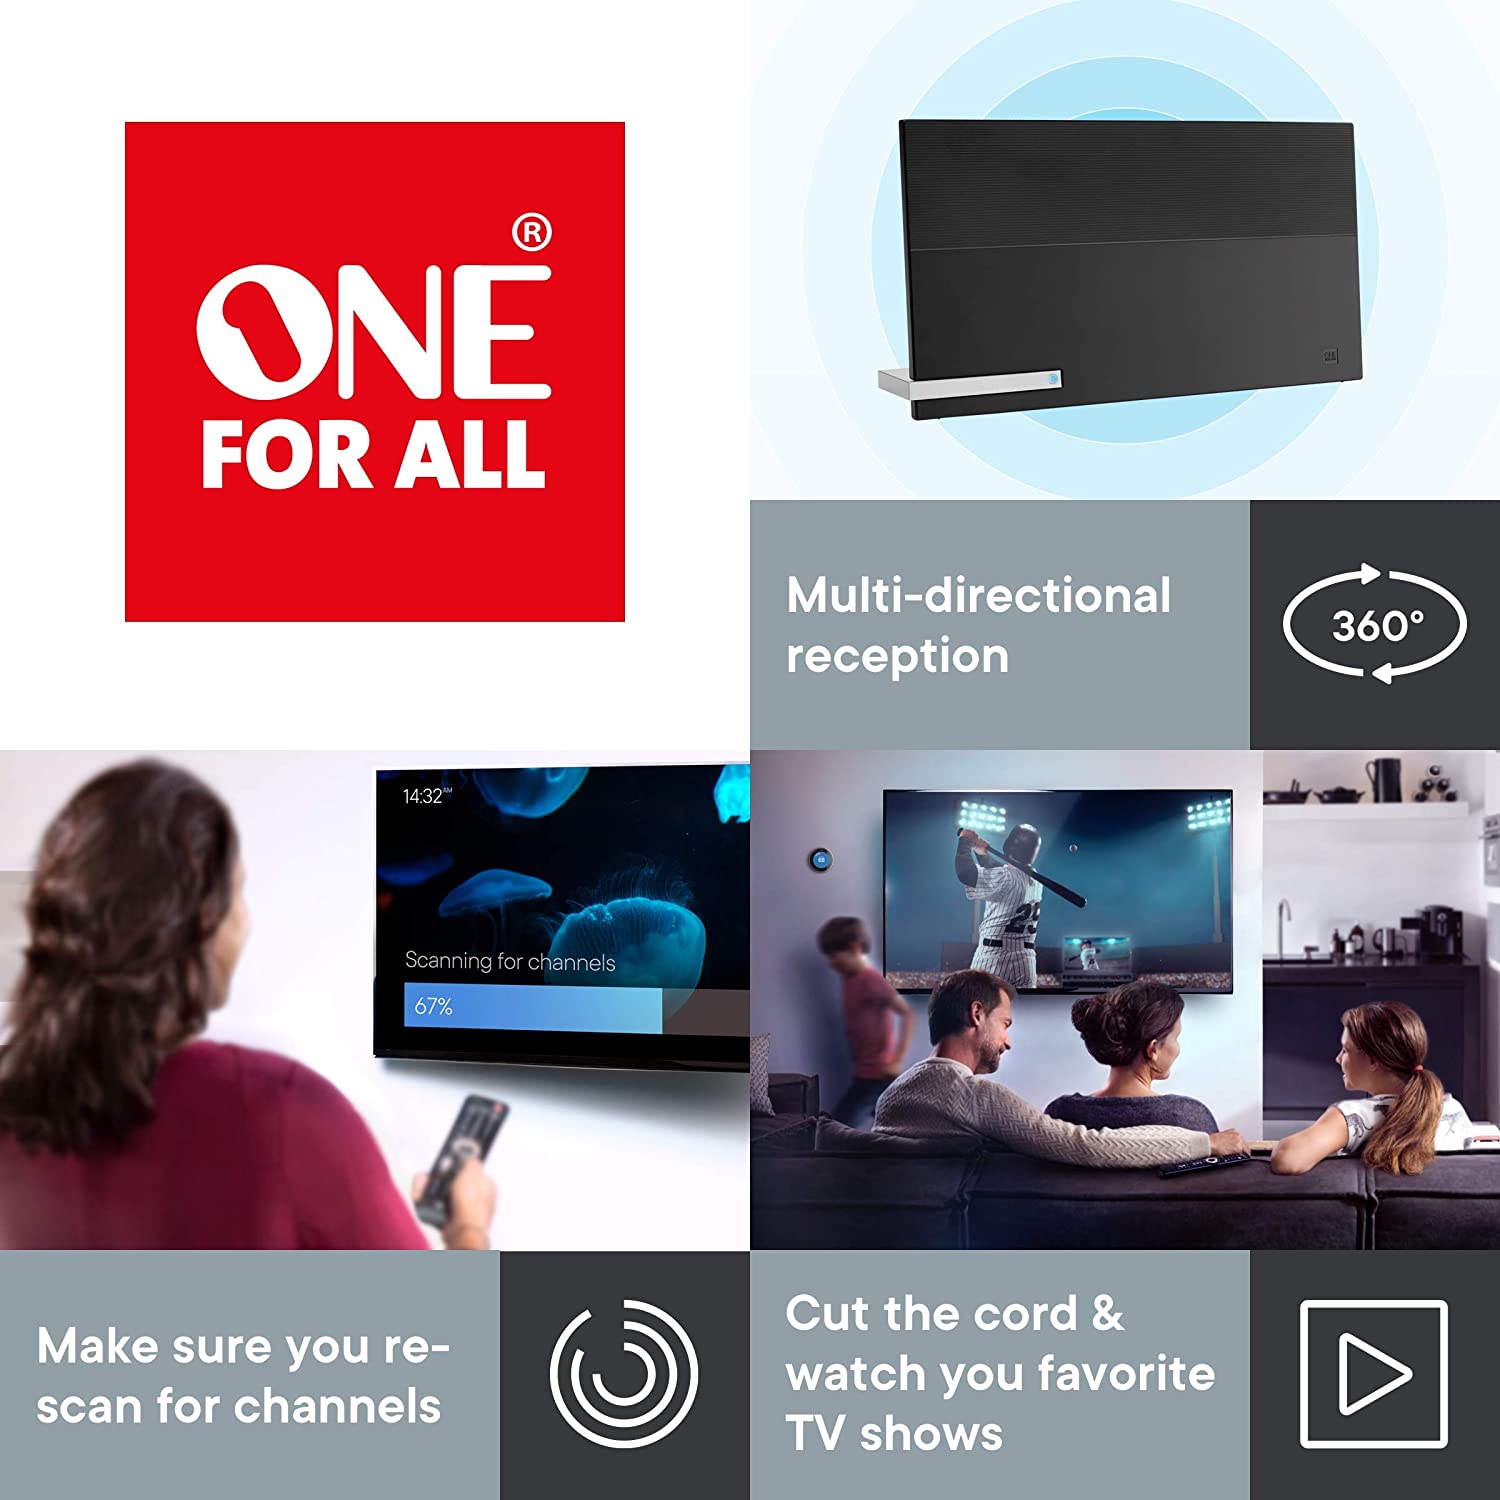 One For All U16424 Amplified HDTV 4K Antenna Over the Air TV Channels